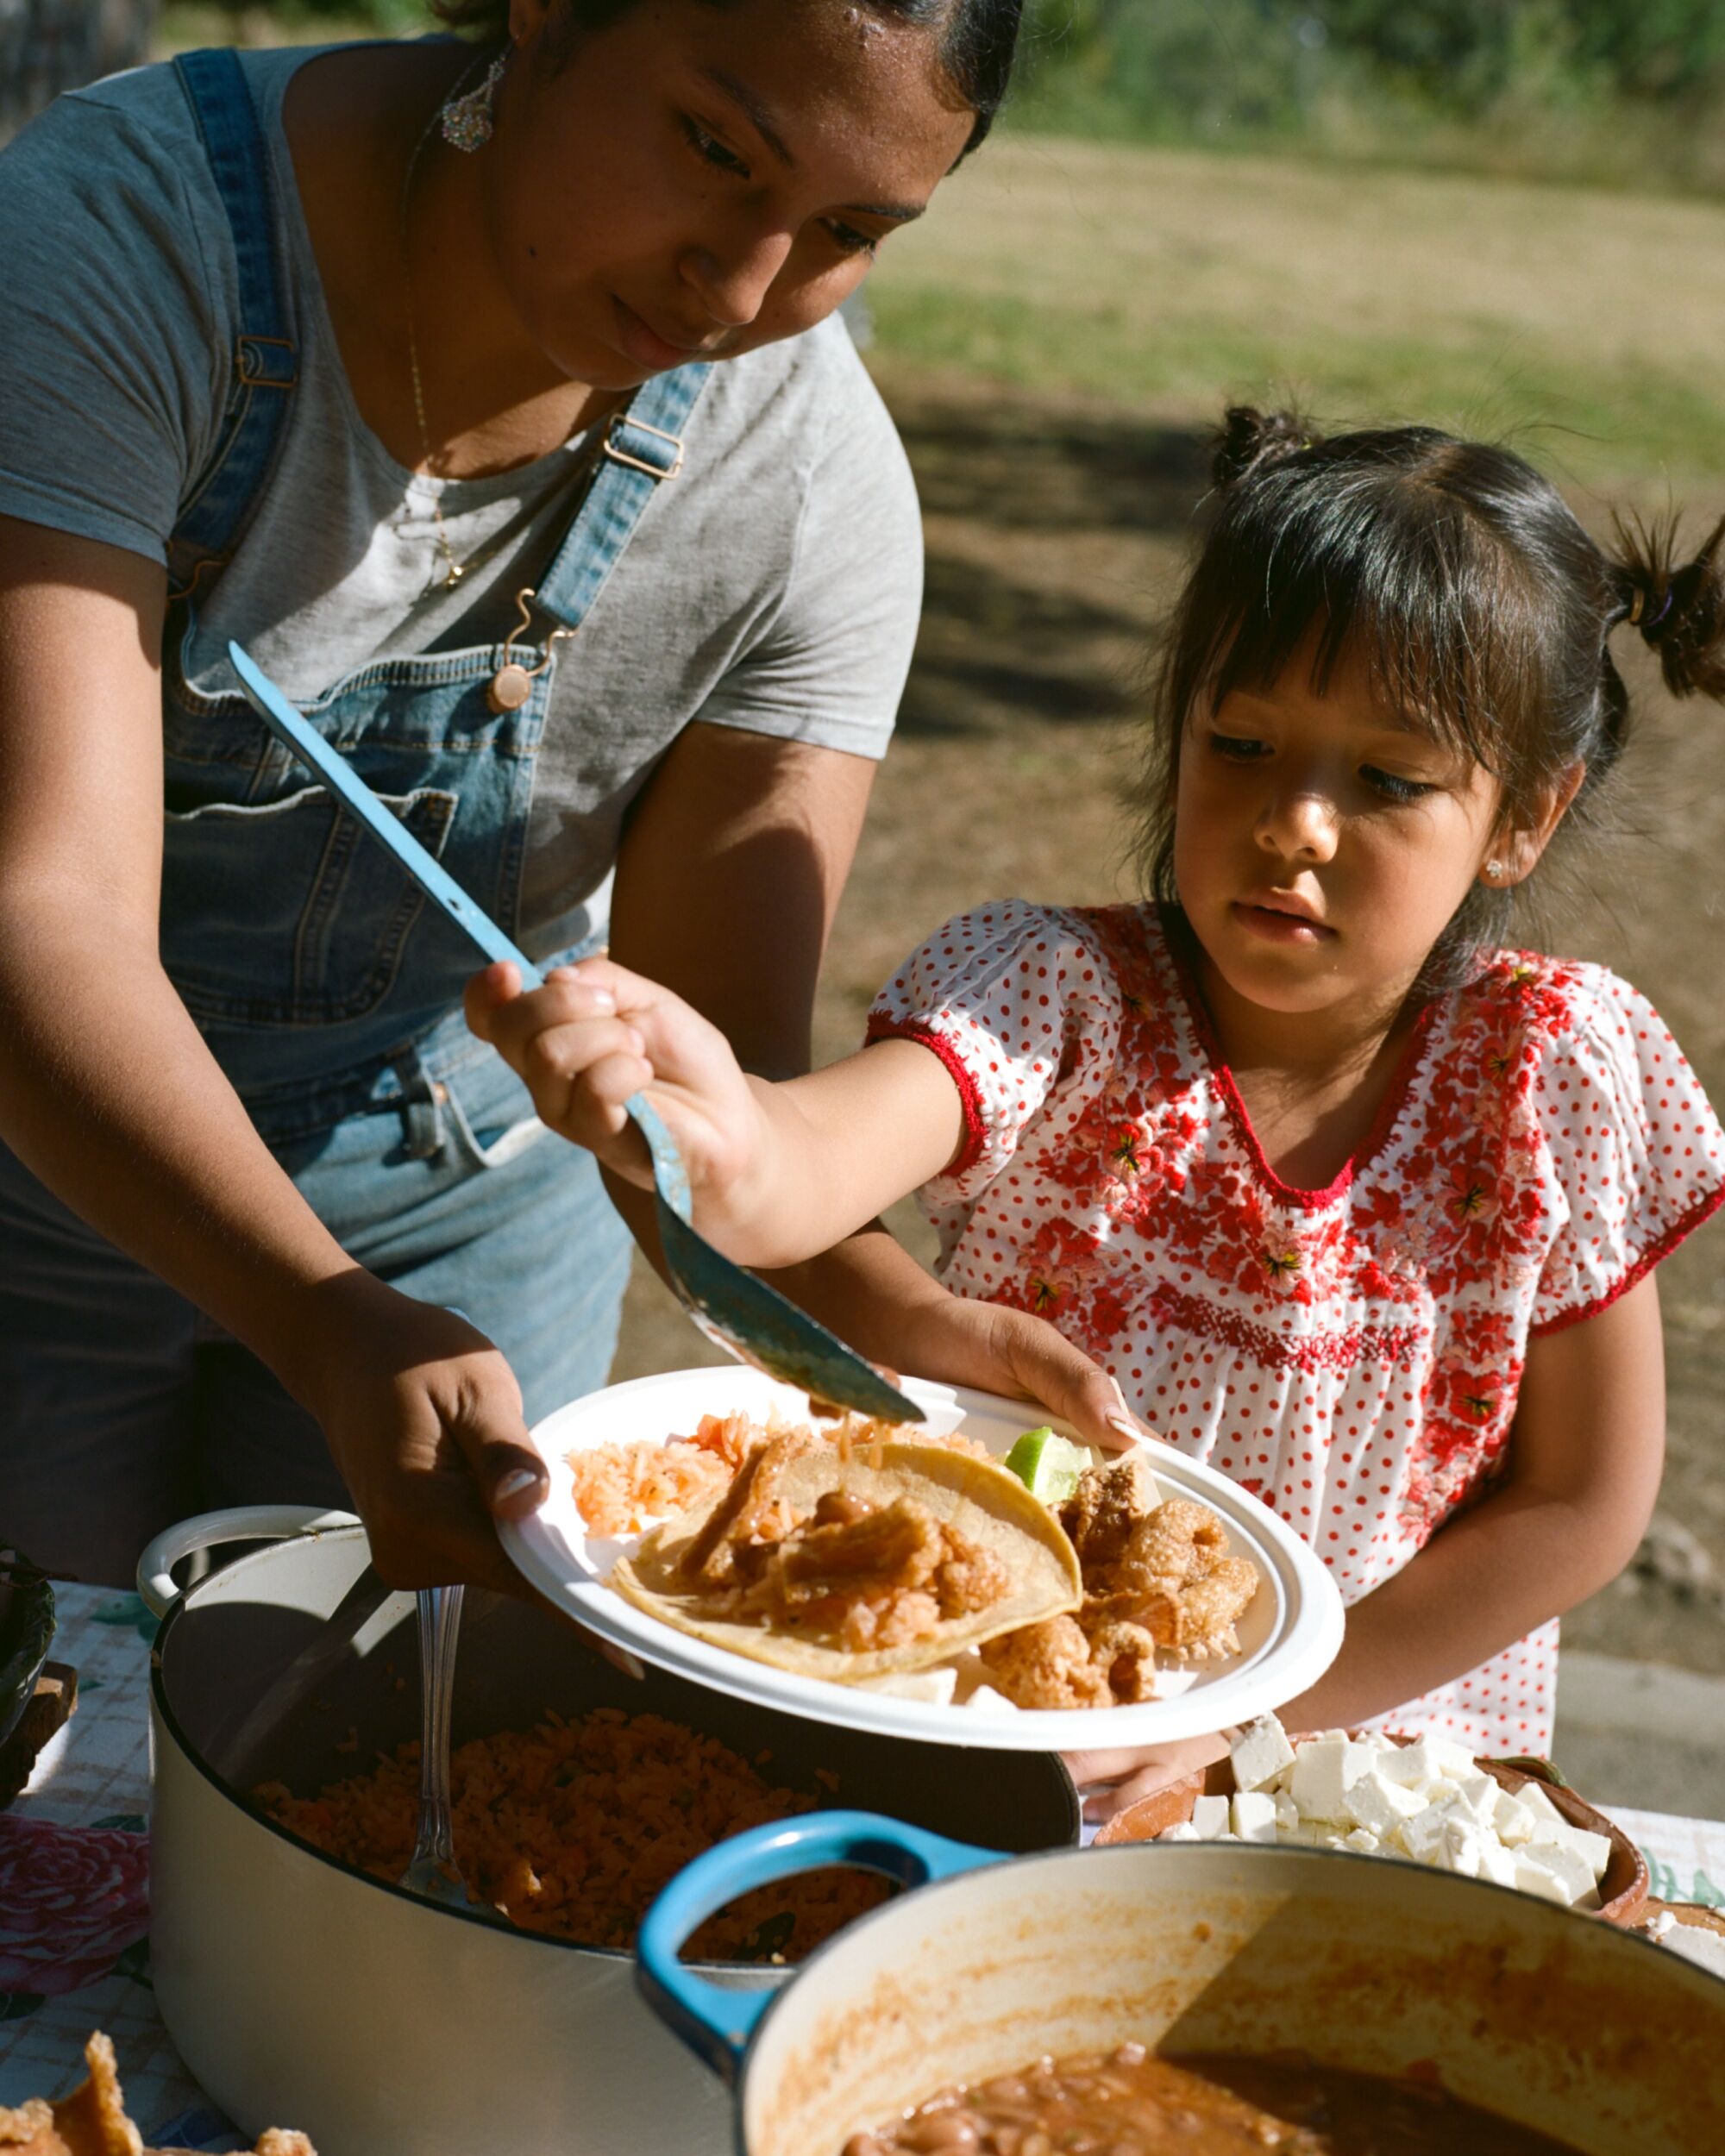 A woman helps a young girl put food on a plate in a park.